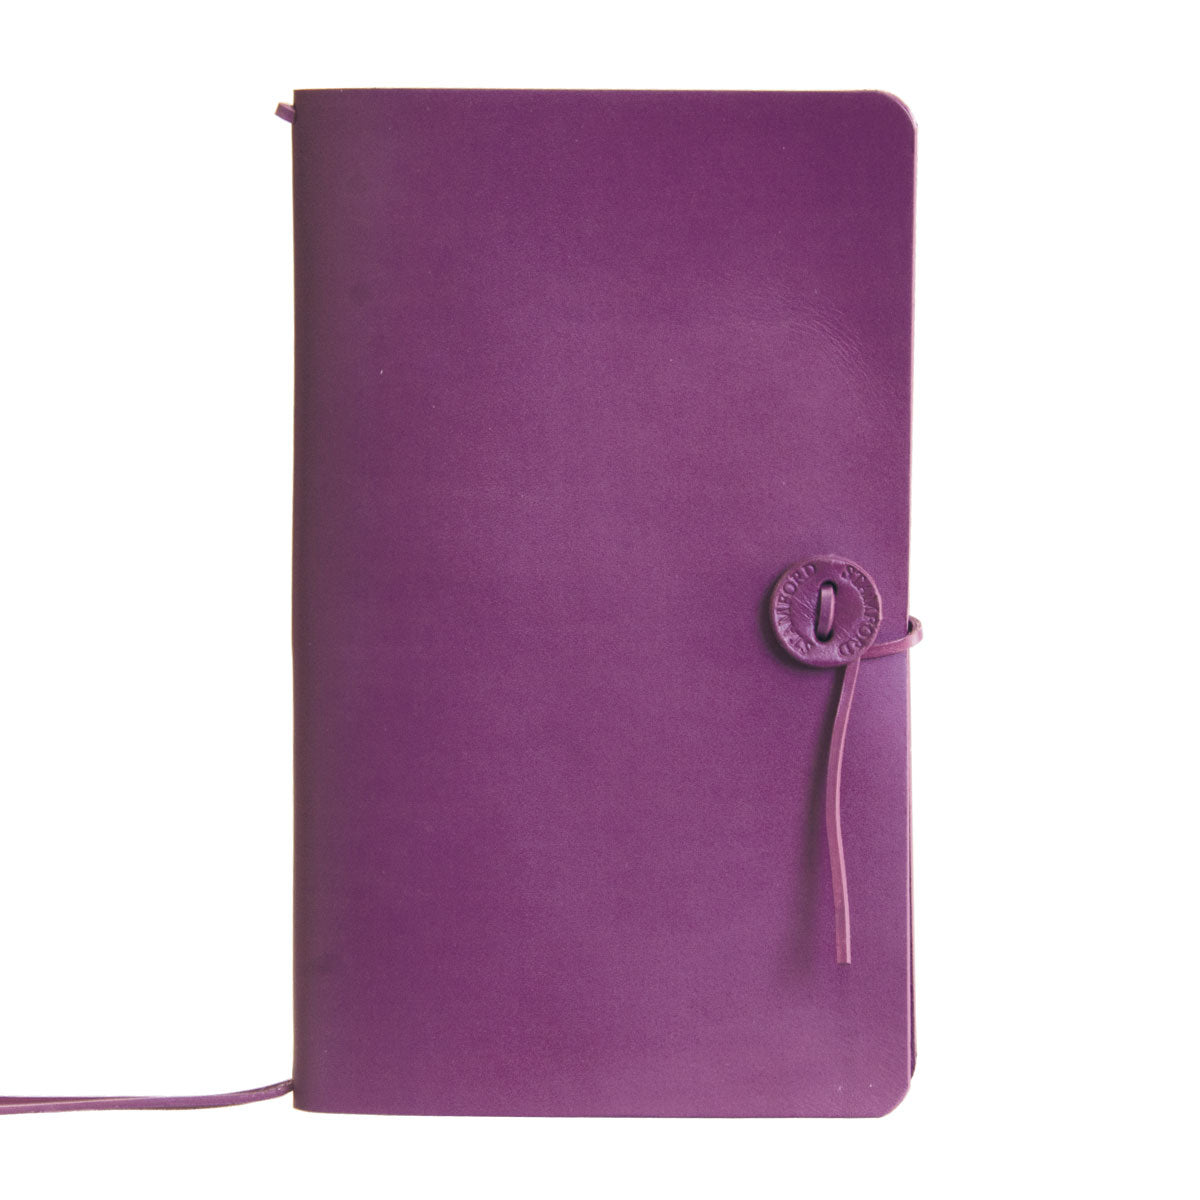 purple leather refillable travellers journal